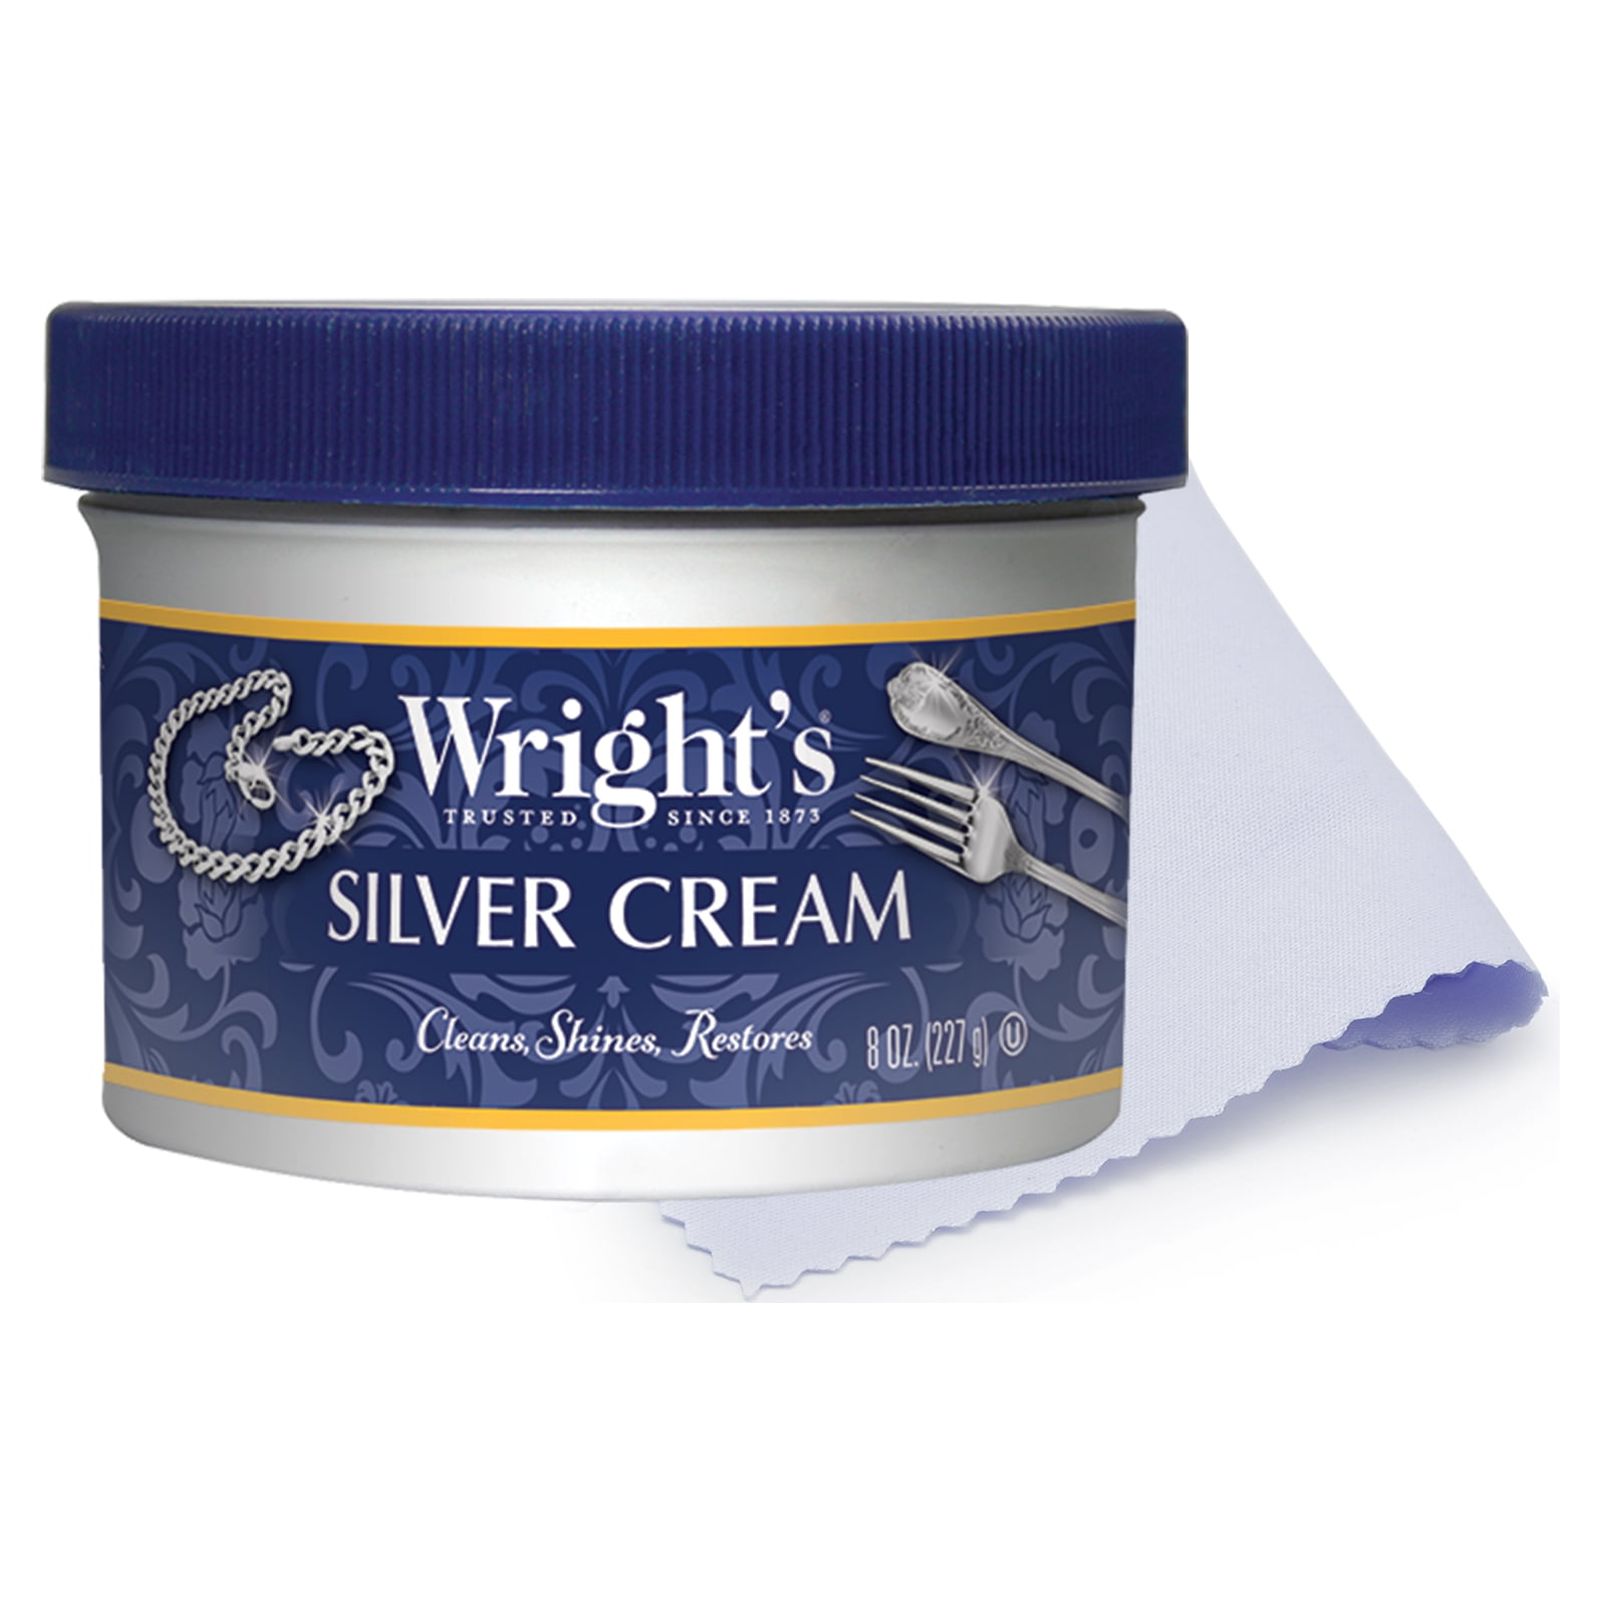 Wright's Silver Polishing Cream, 3-in-1, All-Purpose, 8 Oz, with Microfiber Cloth Included - image 1 of 7